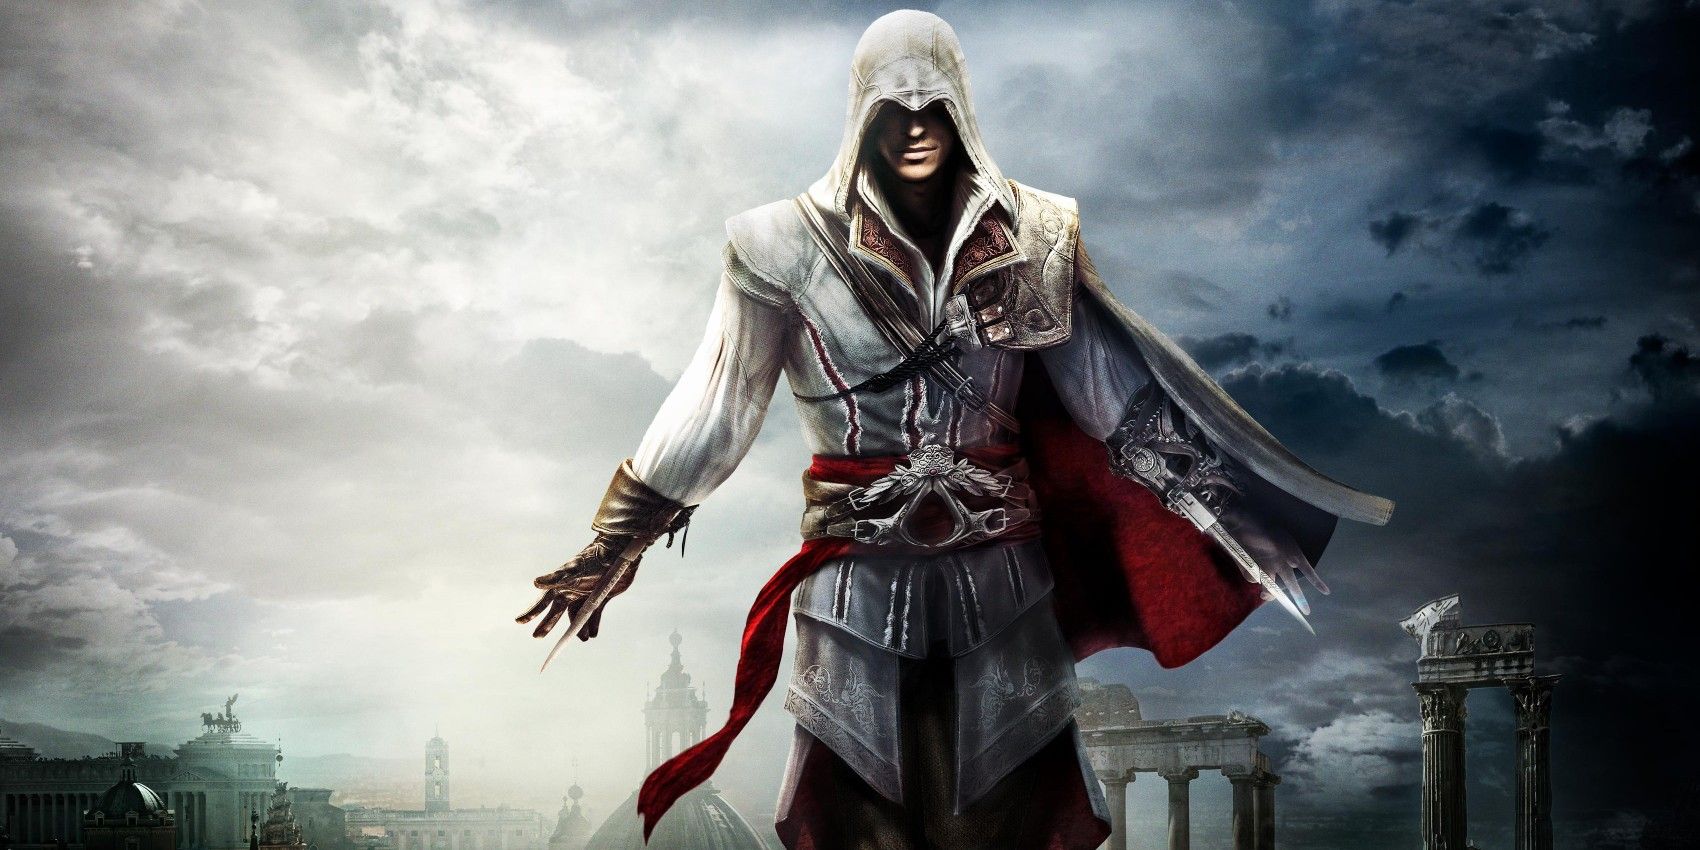 Assassin's Creed has never reached the heights of Ezio again because all subsequent protagonists have been cape-less.